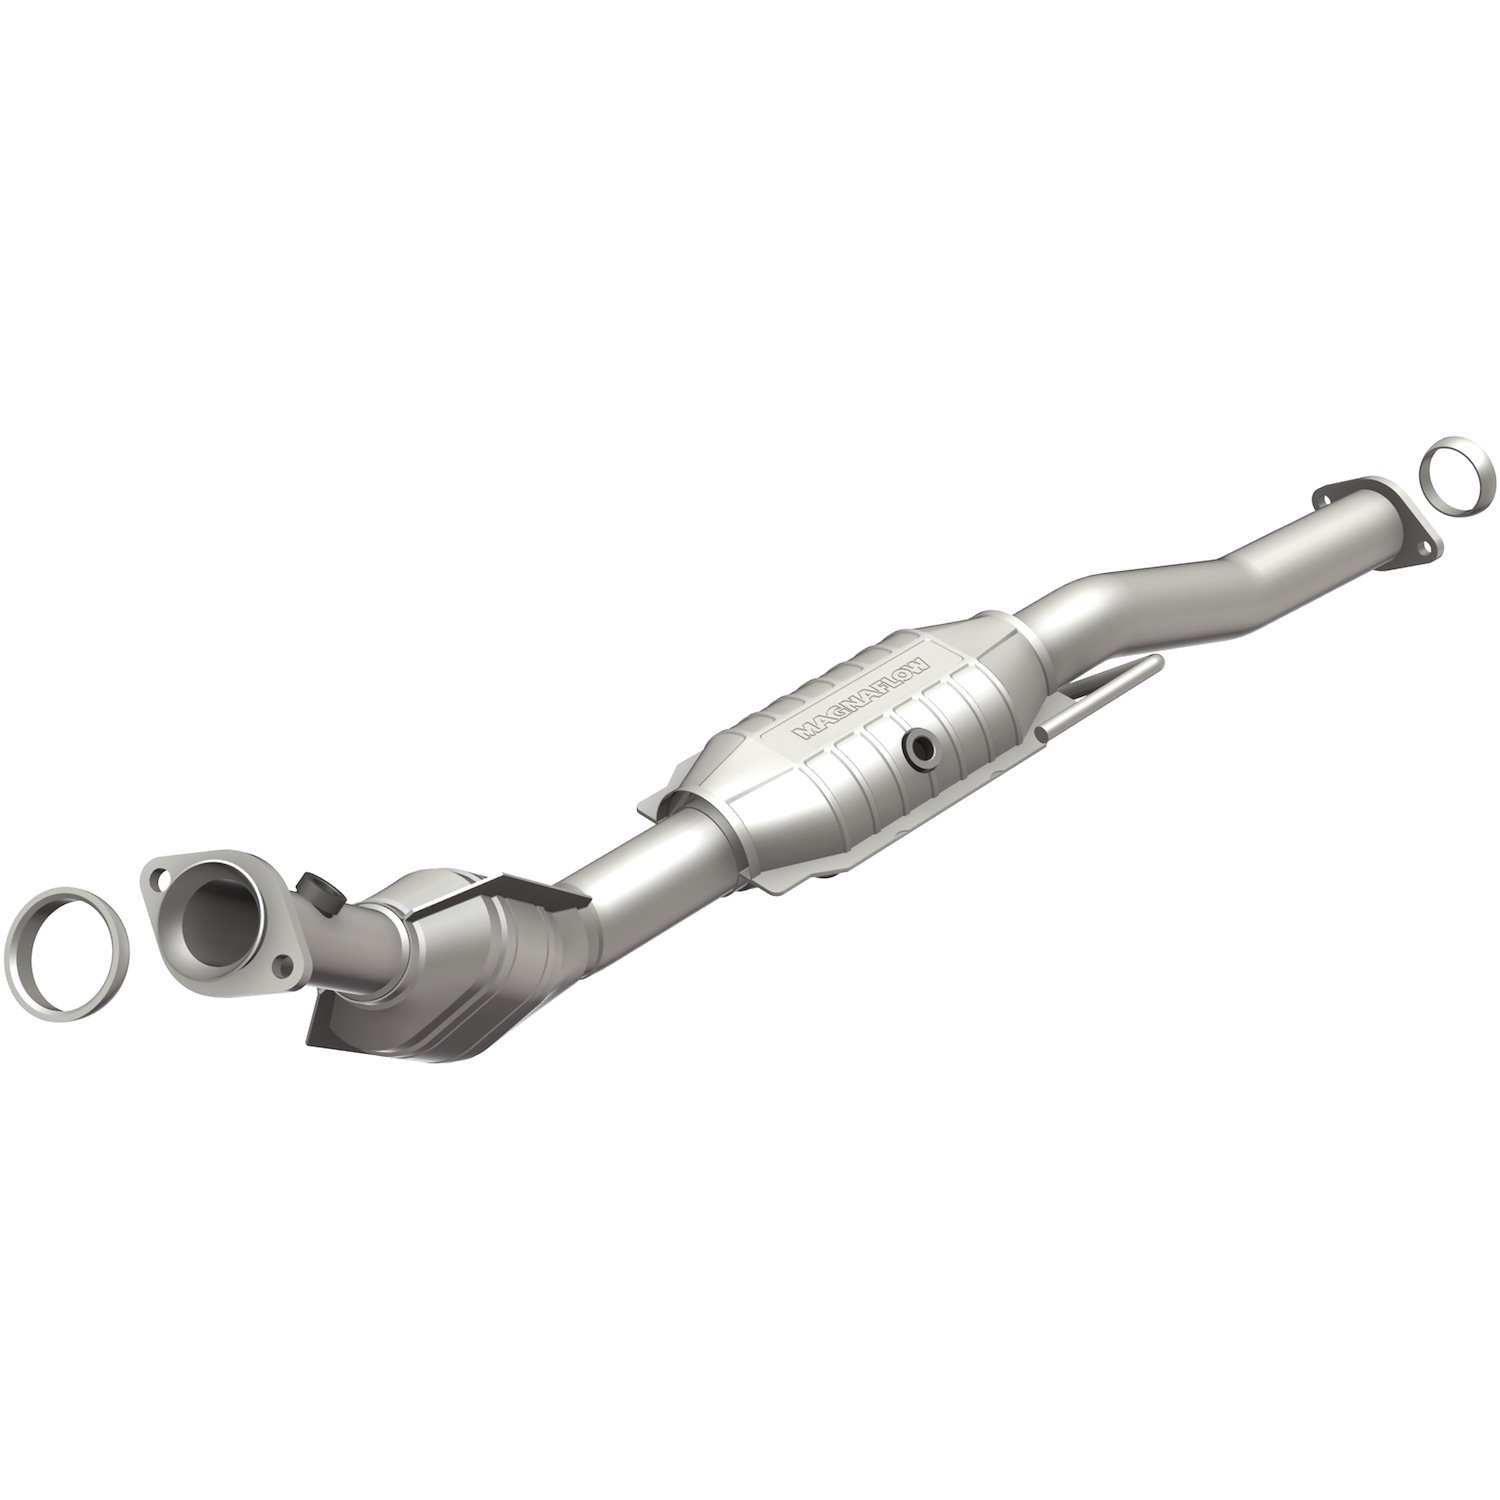 OEM Grade Federal / EPA Compliant Direct-Fit Catalytic Converter 51077